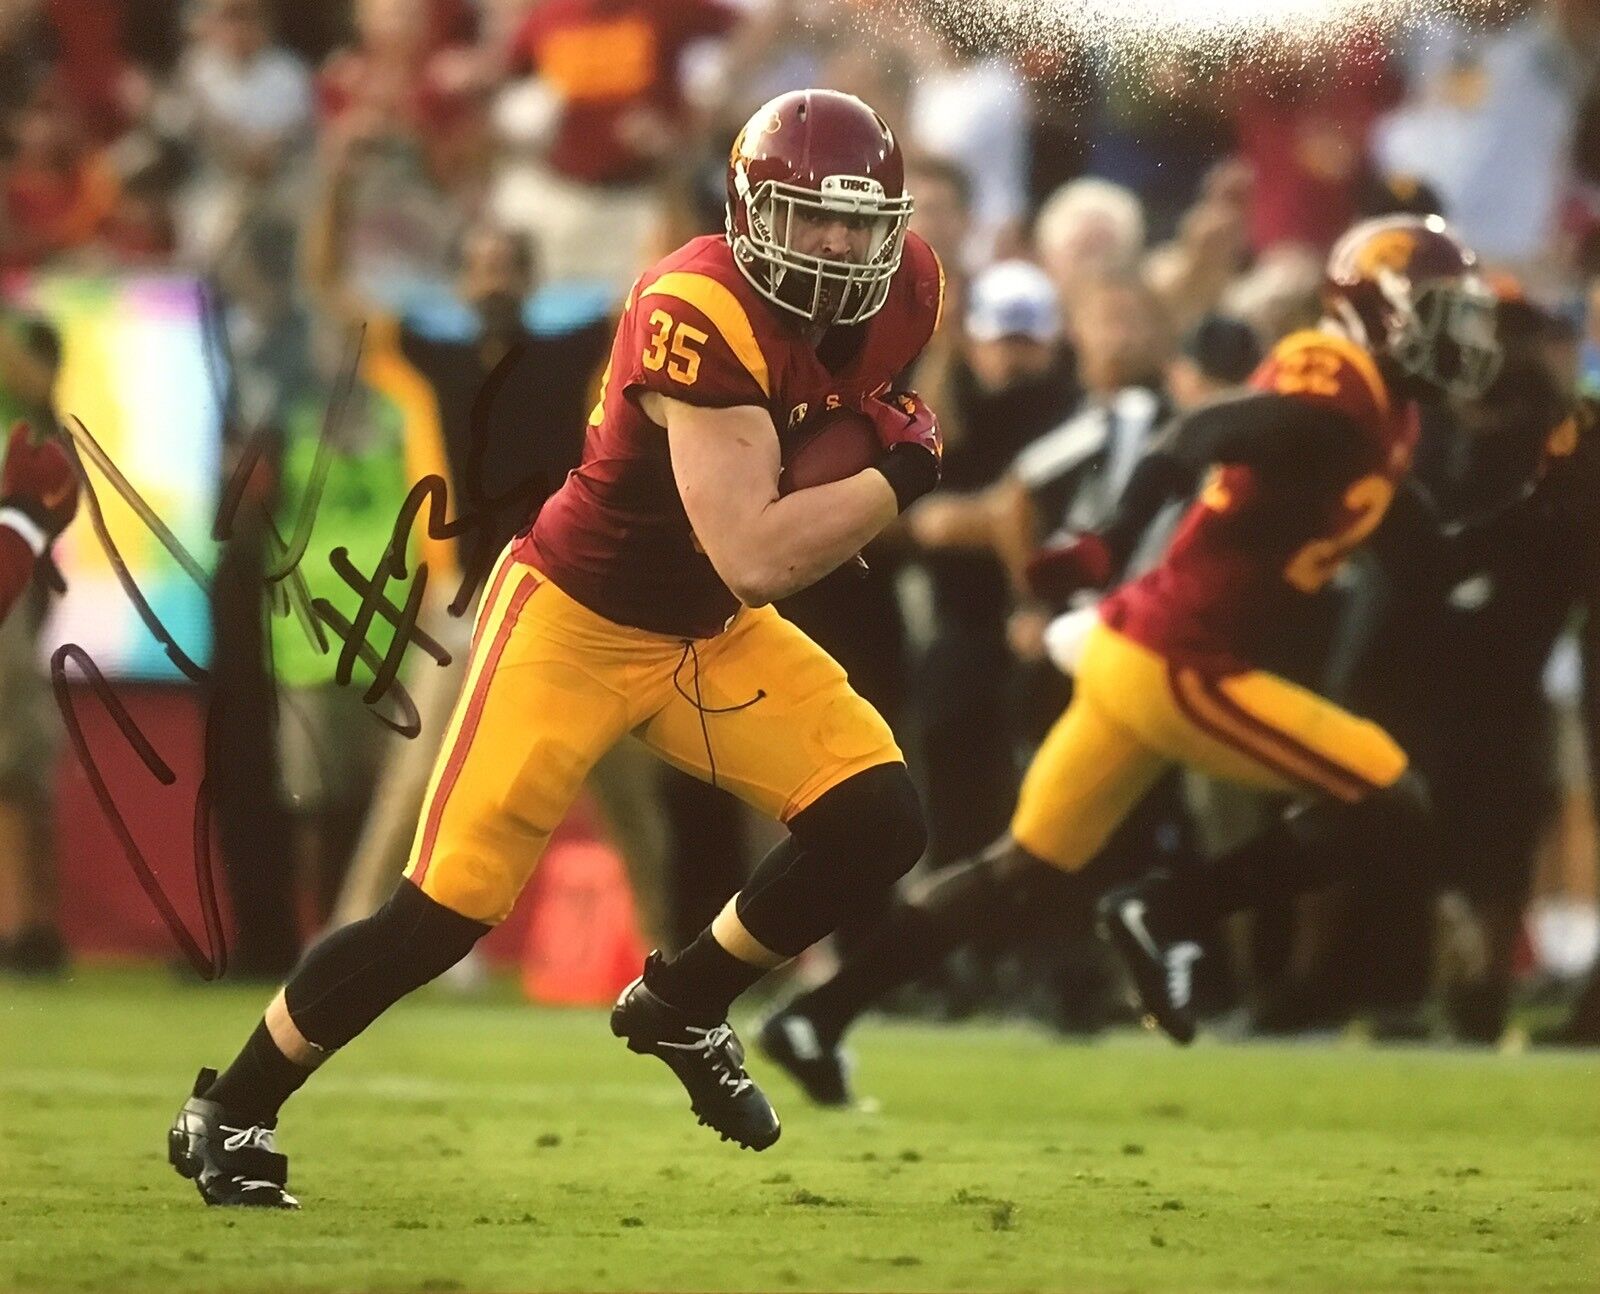 PROOF! CAMERON SMITH Signed Autographed 8x10 Photo Poster painting USC Trojans Football